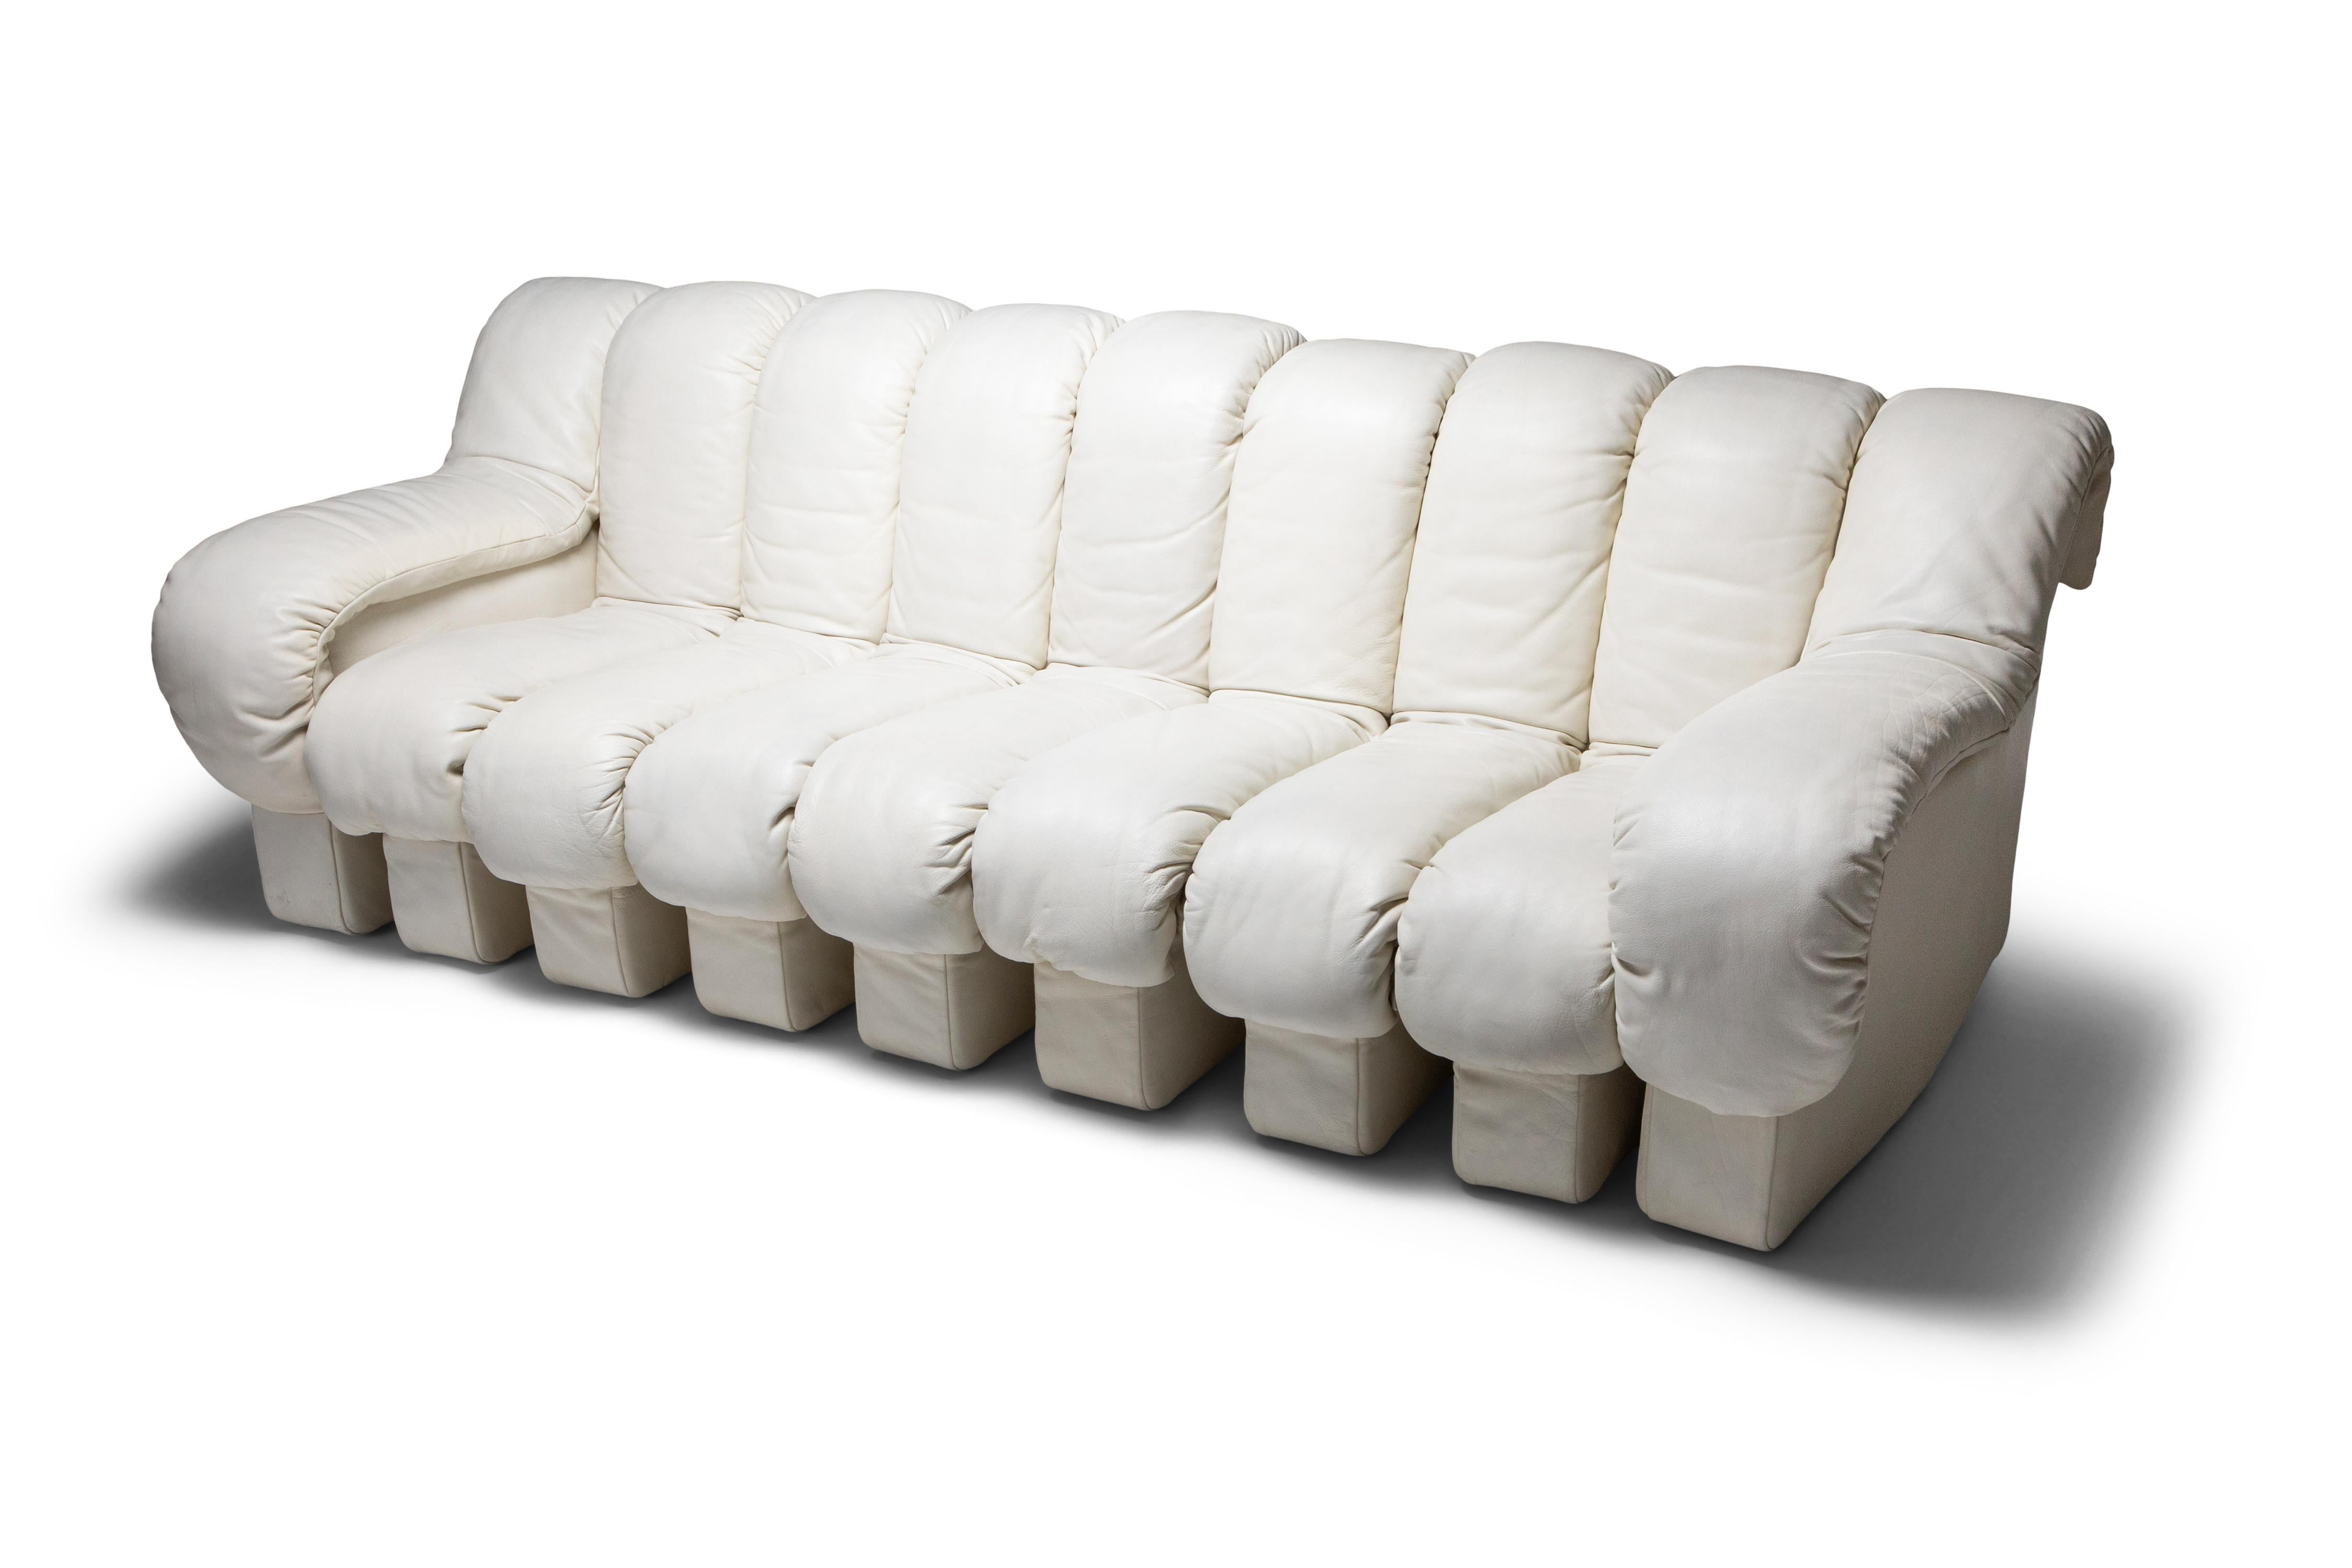 Swiss De Sede DS-600 Sectional Sofa in White Leather